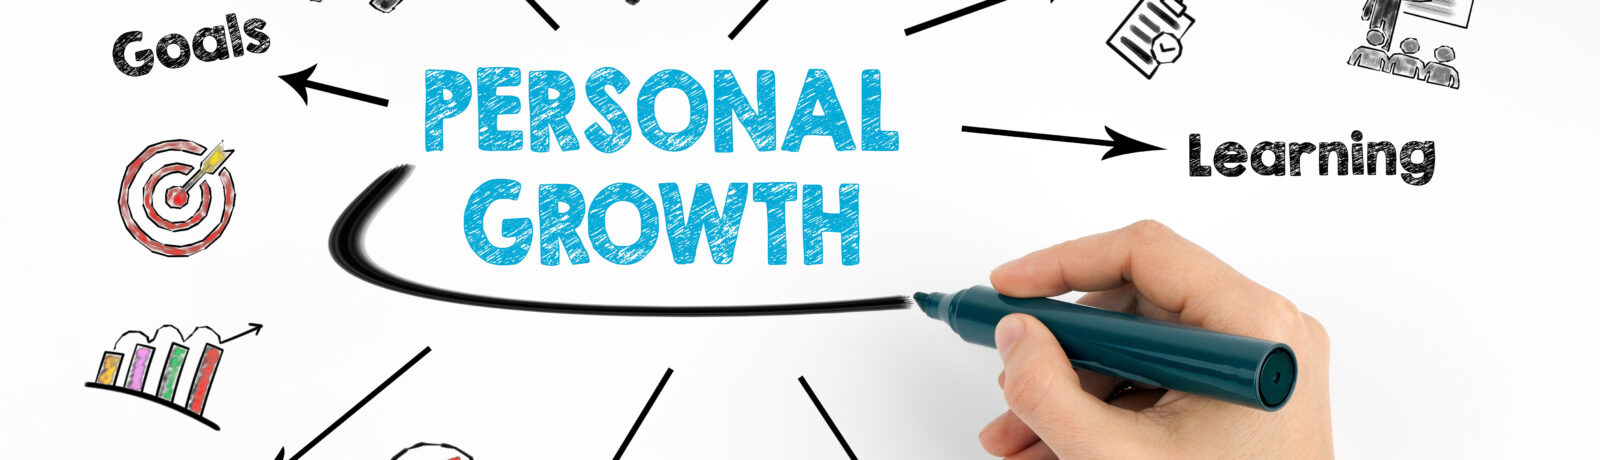 The word "personal growth" written on a whiteboard surrounded by related concepts.